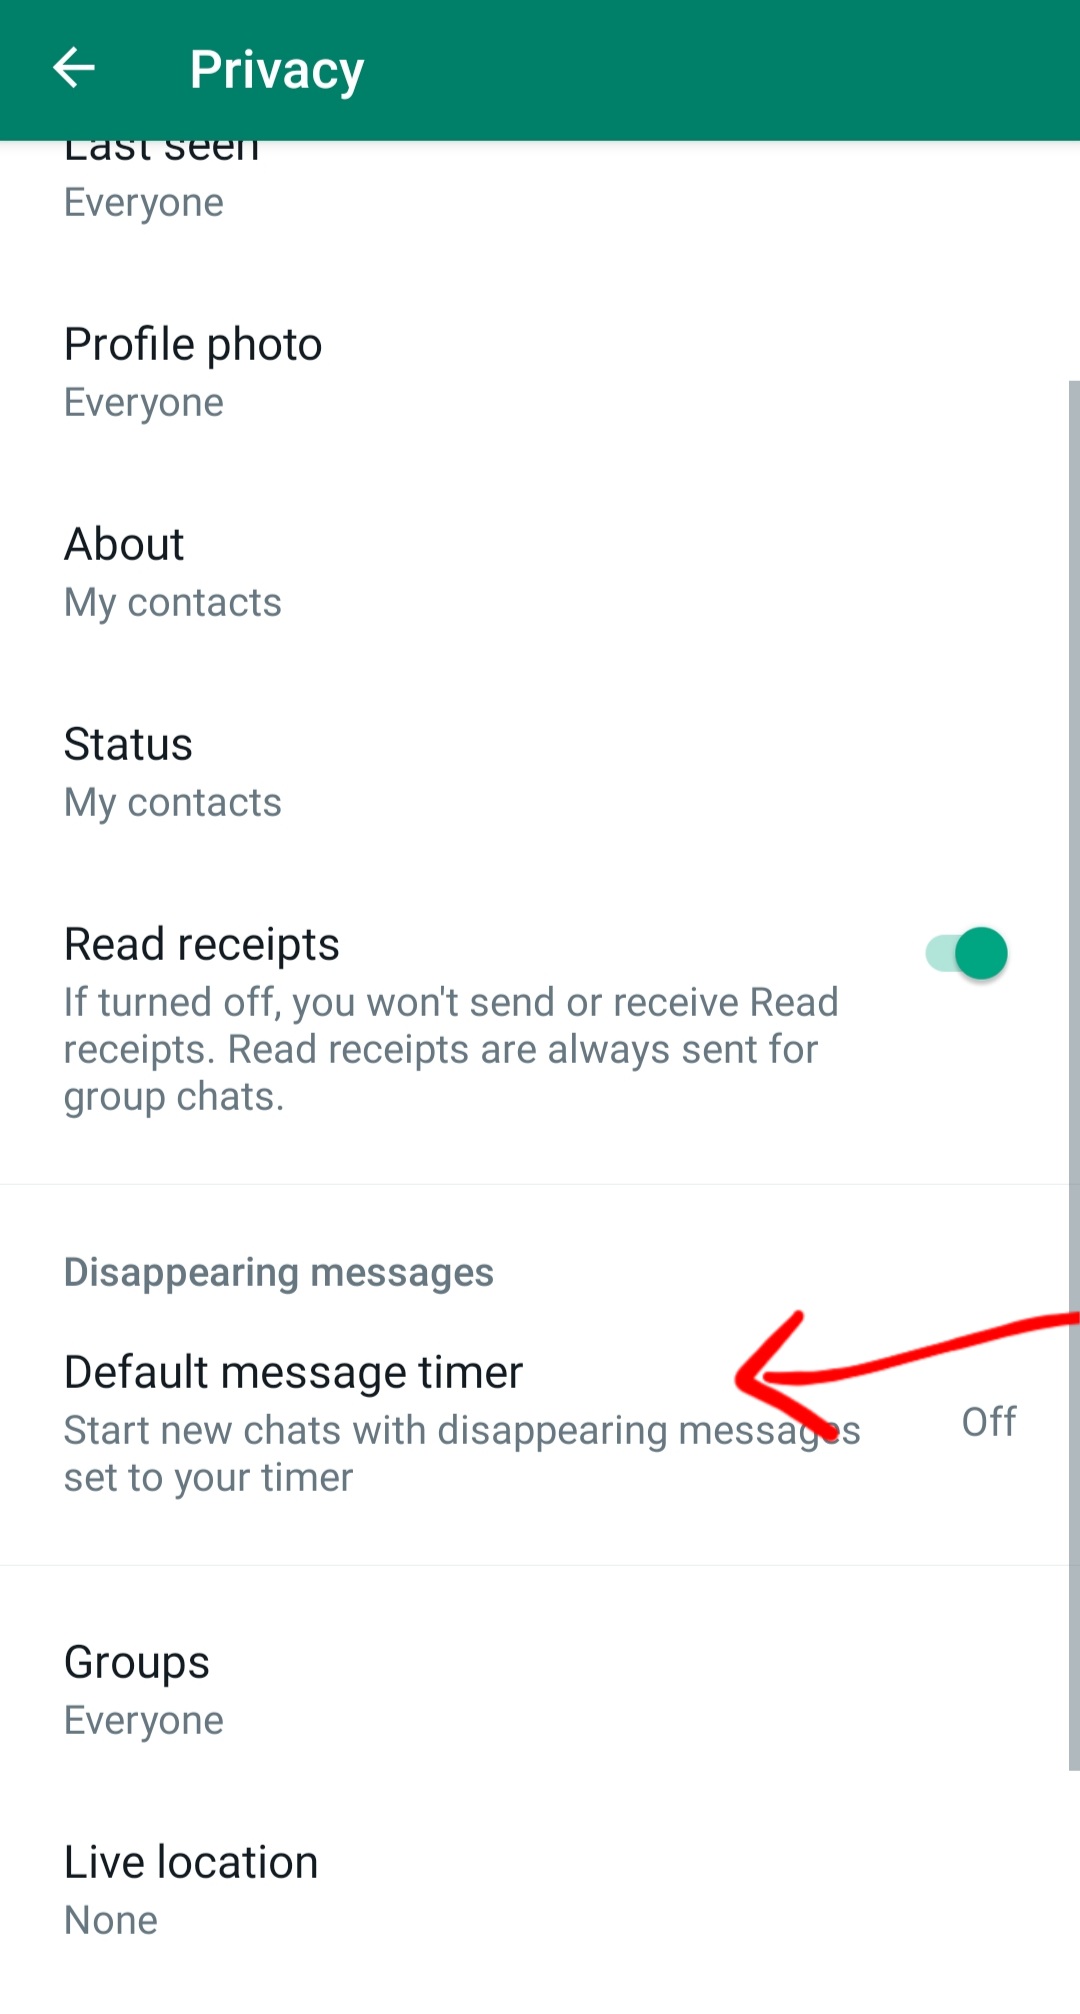 How To Set Default Timer For Disappearing Messages In WhatsApp?